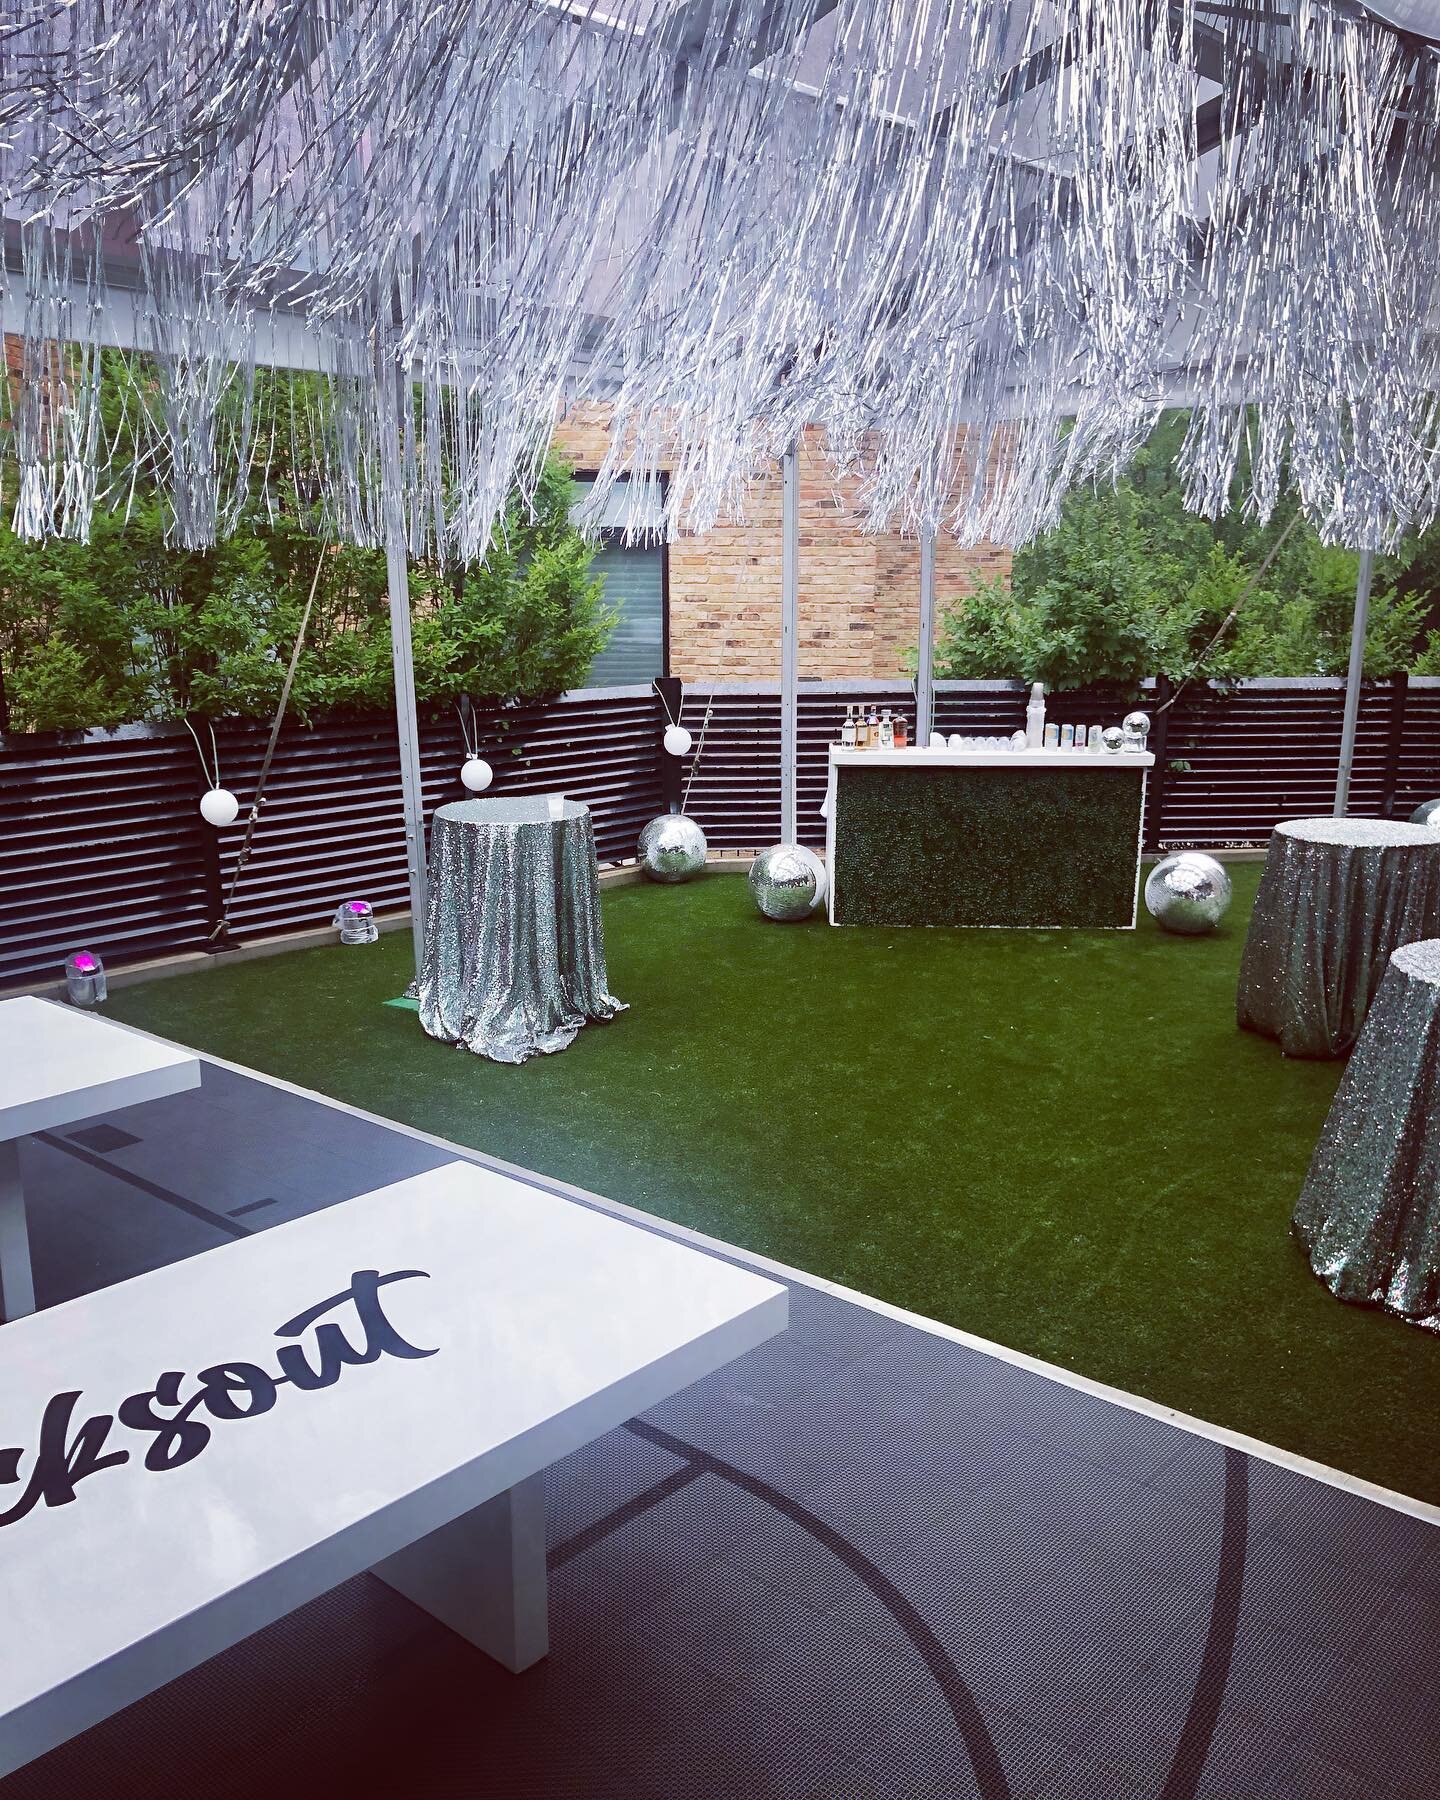 Let&rsquo;s fucking dance!  The entire theme to this housewarming/back to life throw down with a killer crew.  Complete with custom flip cup tables, disco garden and silent disco! 

The team;
Catering @entertaining_co 
Decor/lighting @frostchicago 
T